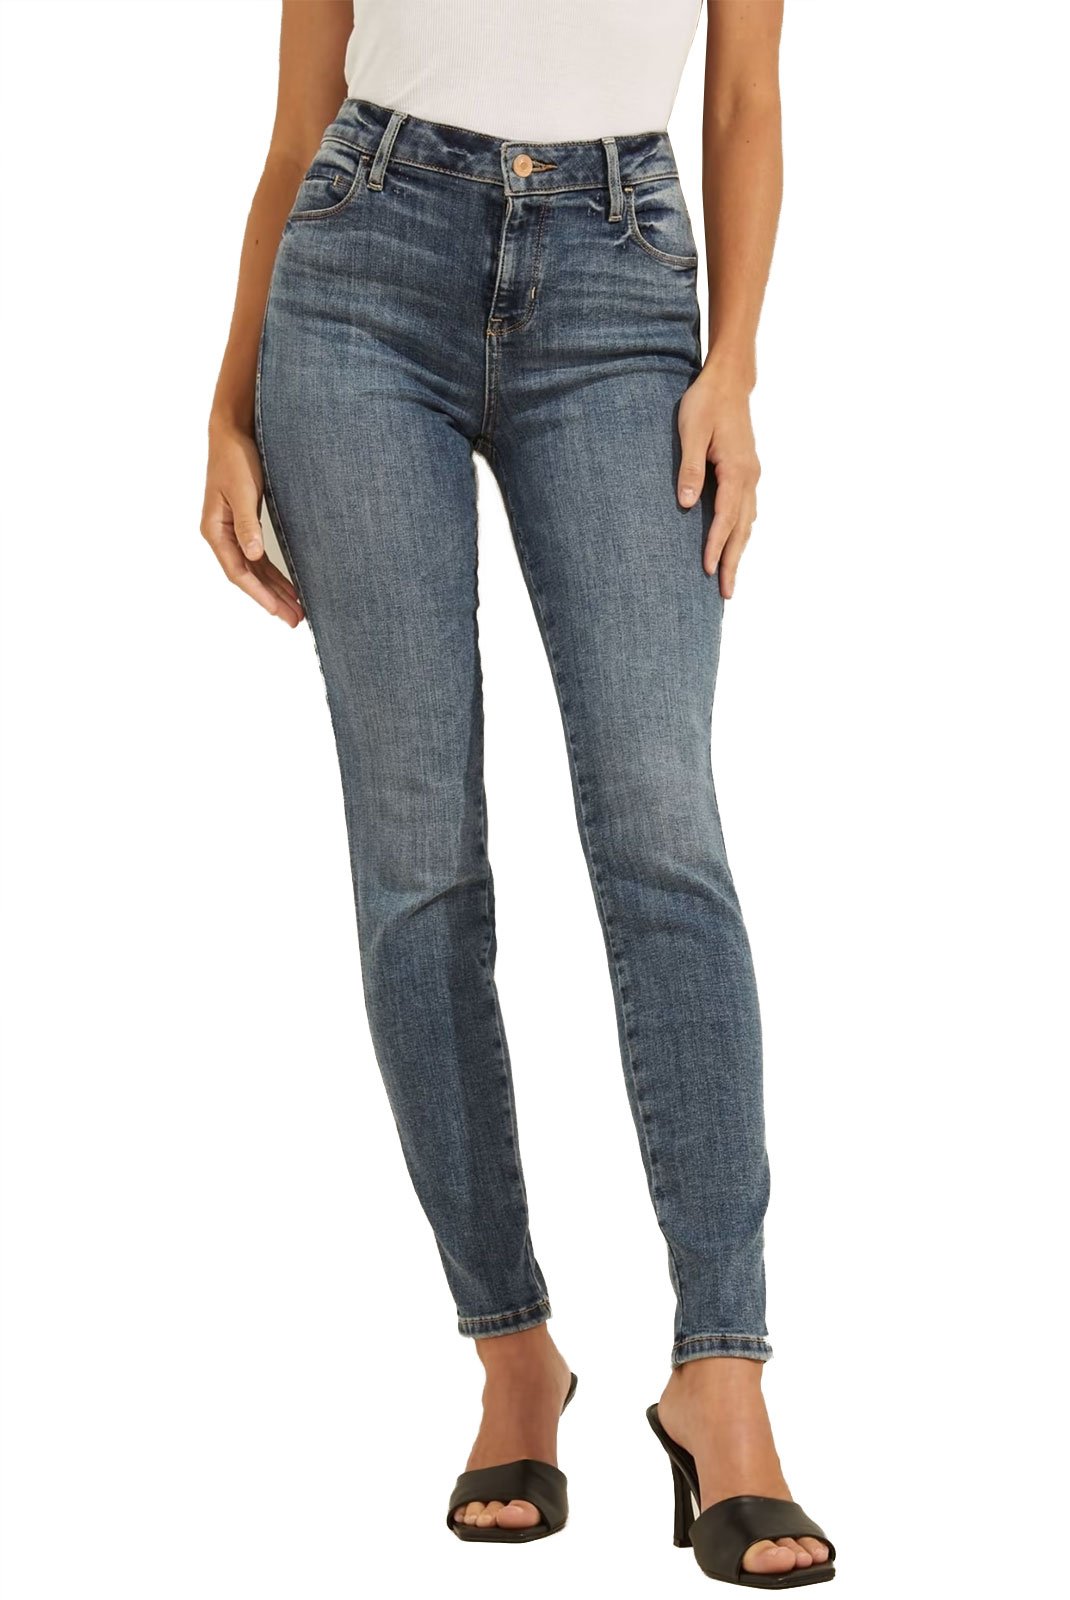 Jeans   Guess jeans W1YA05 R4660 DUBD DOUBLE DOWN